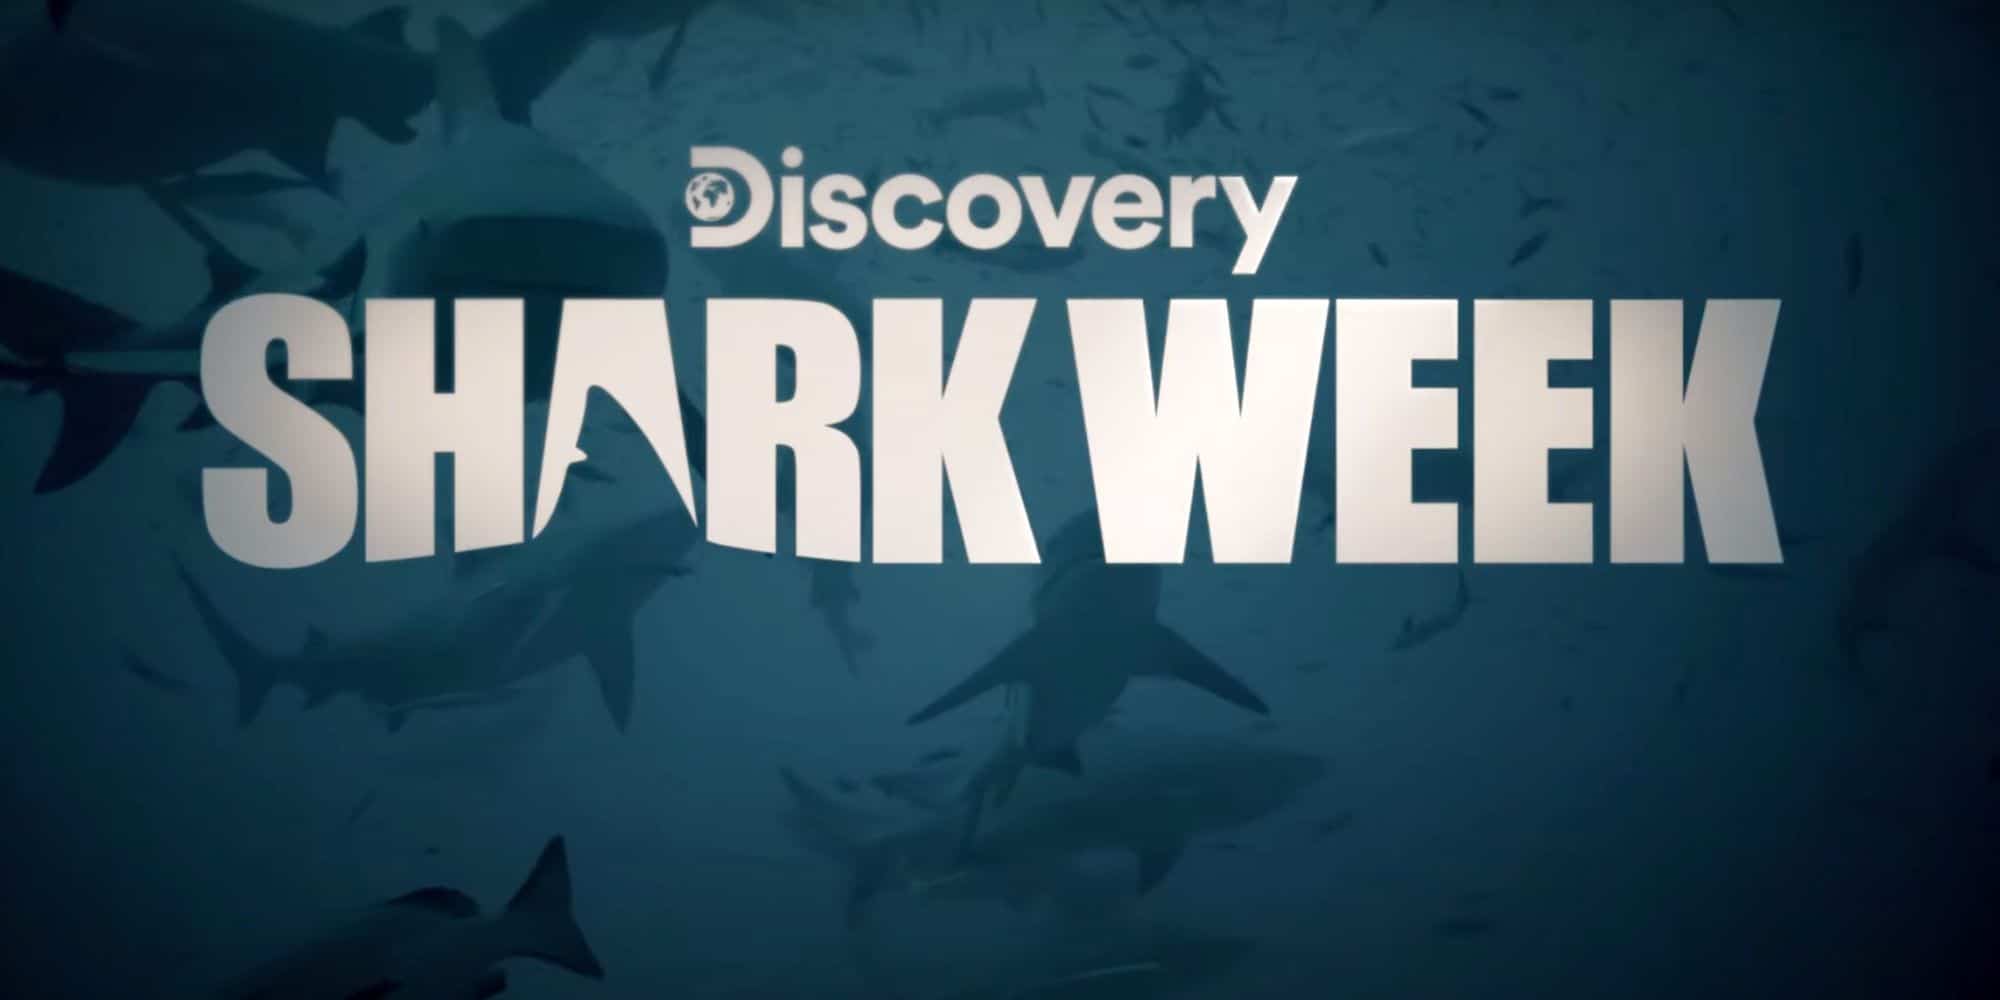 Shark Week(Credit: Discovery Channel)